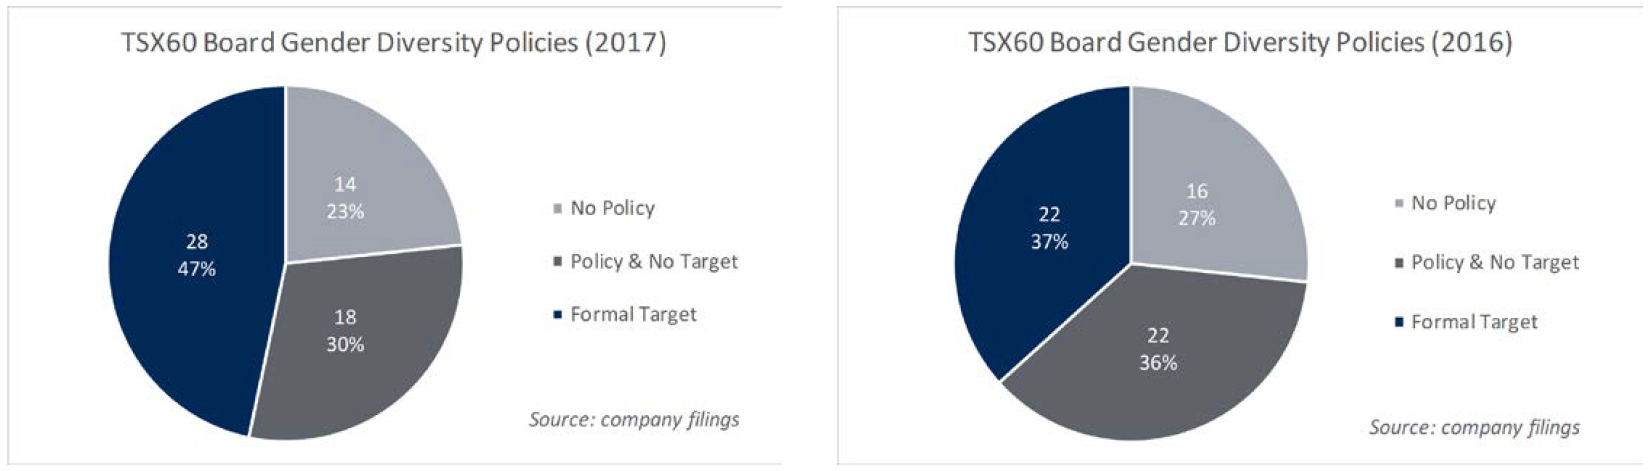 TSX60 Board Gender Diversity Policies (2017 and 2016)